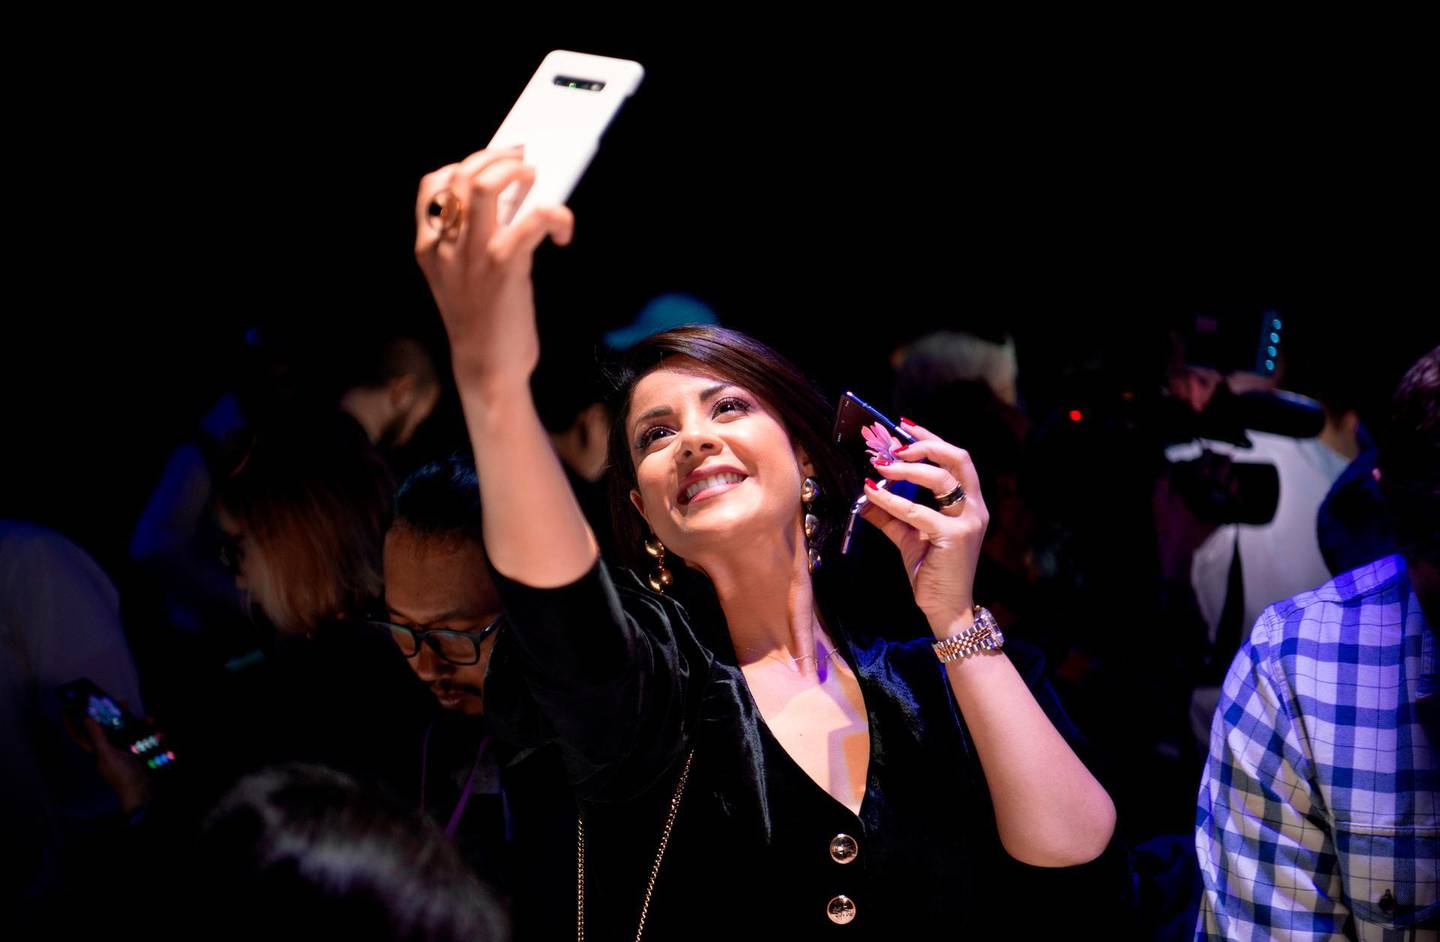 A member of the media takes a selfie while holding s Samsung Galaxy Z Flip phone displayed during the Samsung Galaxy Unpacked 2020 event in San Francisco, California on February 11, 2020.  Samsung unveiled its second folding smartphone, a "Z Flip" handset with a lofty price tag aimed at "trendsetters." The smartphone flips open, like a pocket cosmetics case, opening into a 6.7-inch screen. / AFP / Josh Edelson
